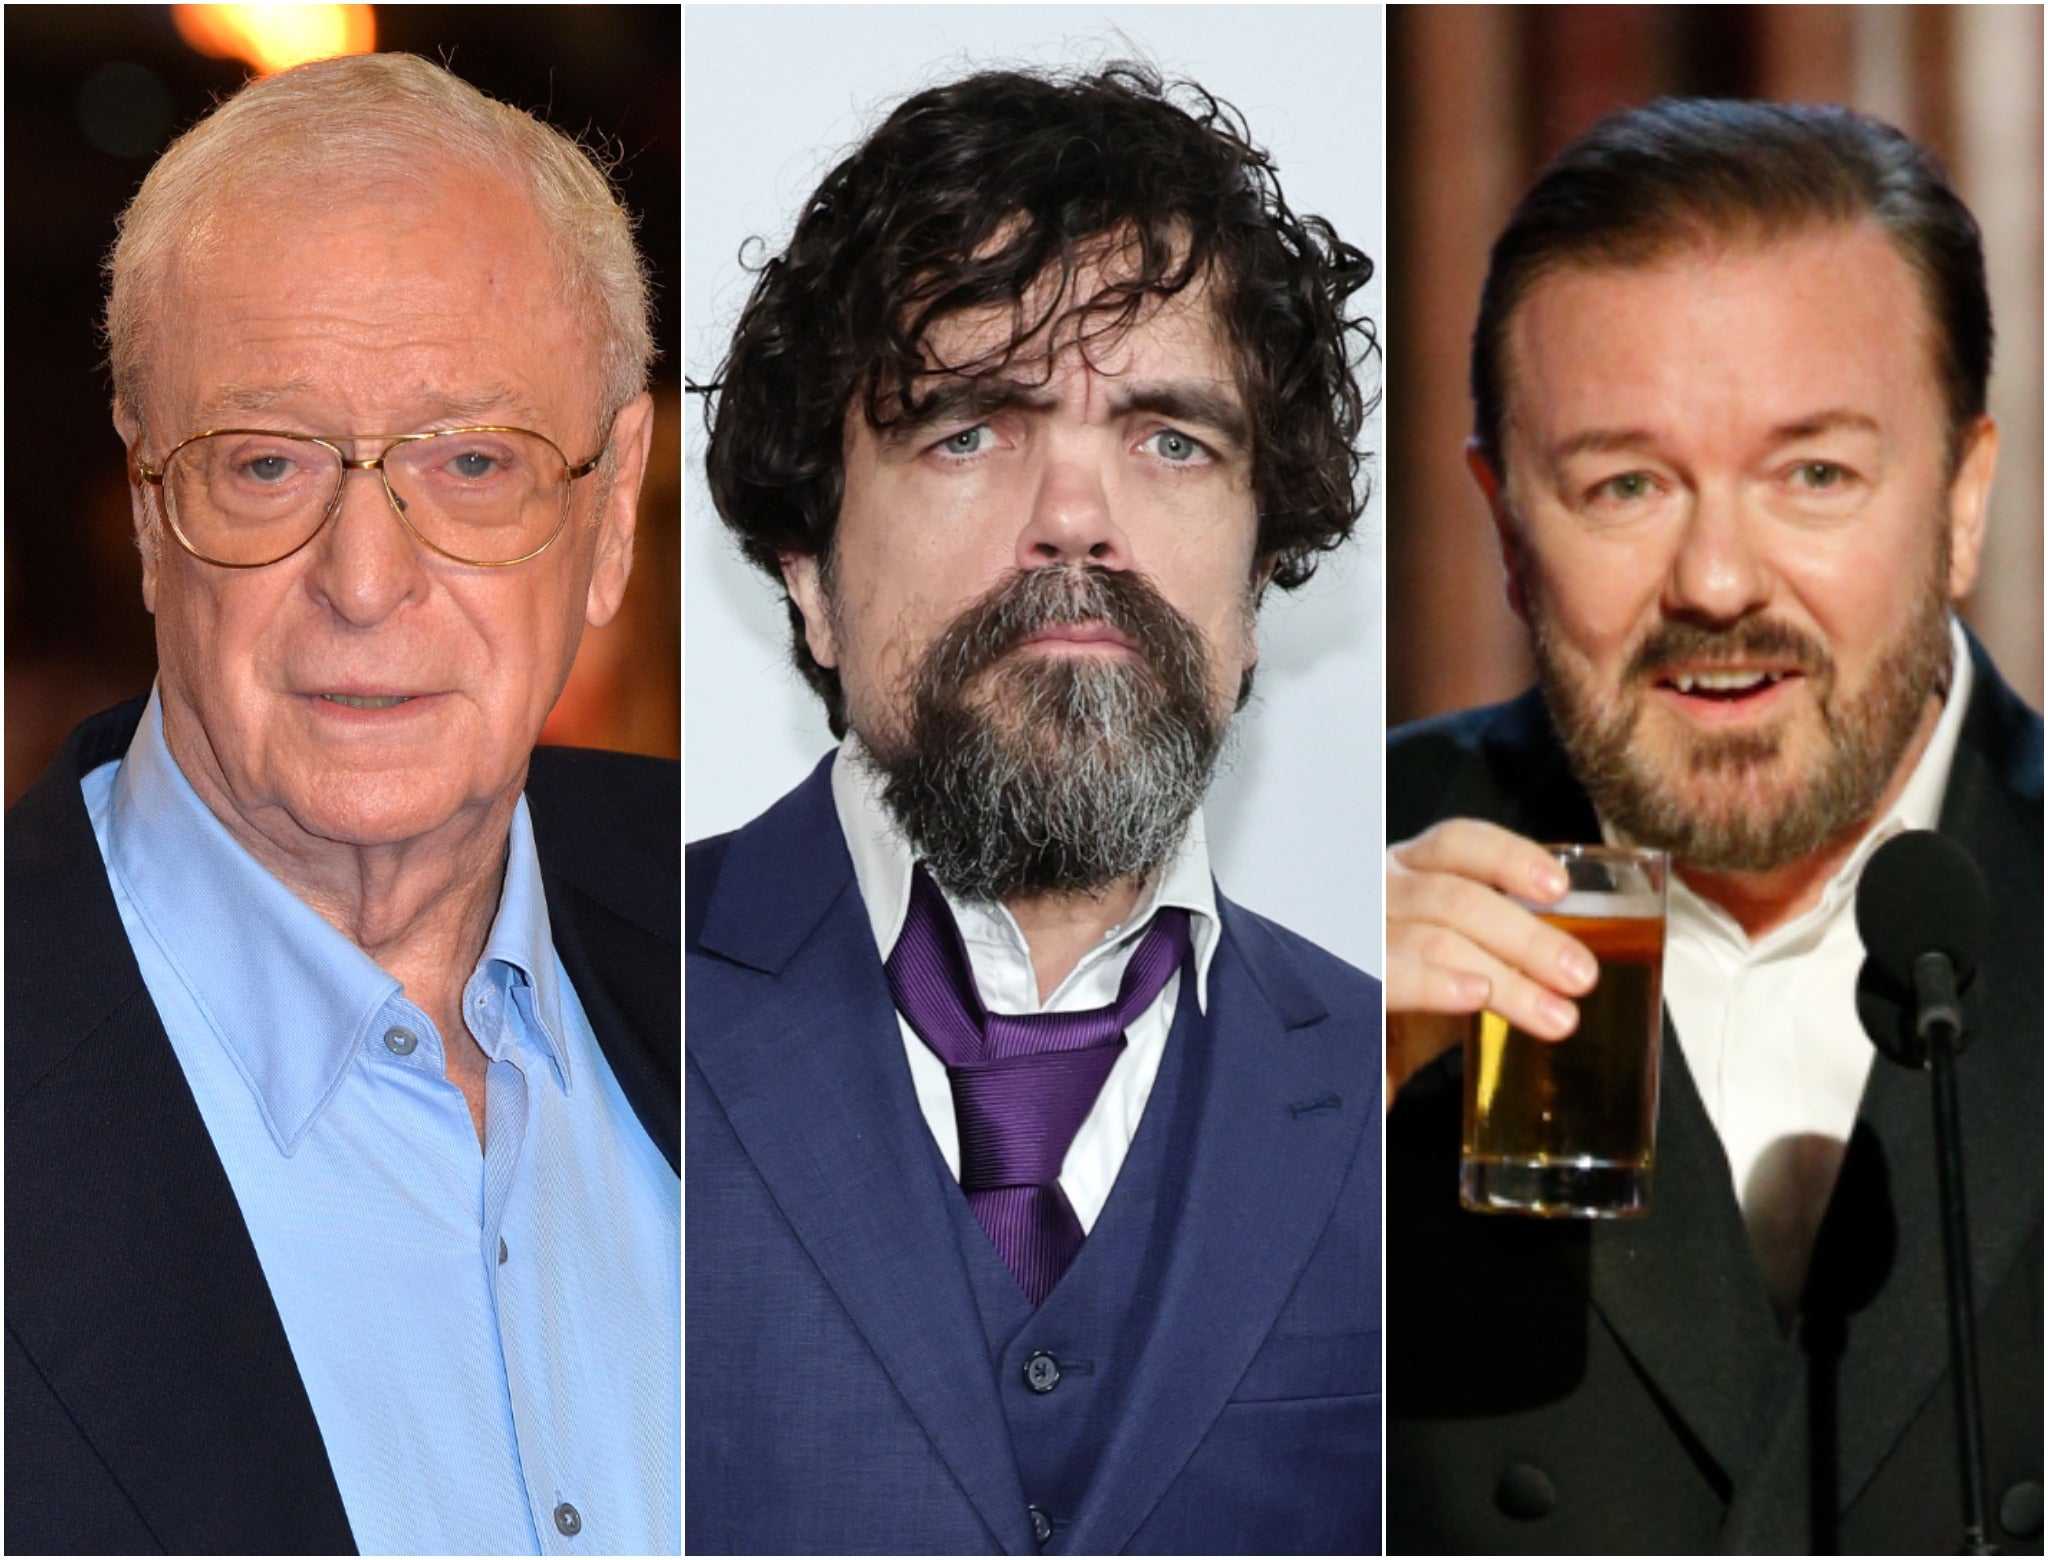 L-R: Michael Caine, Peter Dinklage and Ricky Gervais